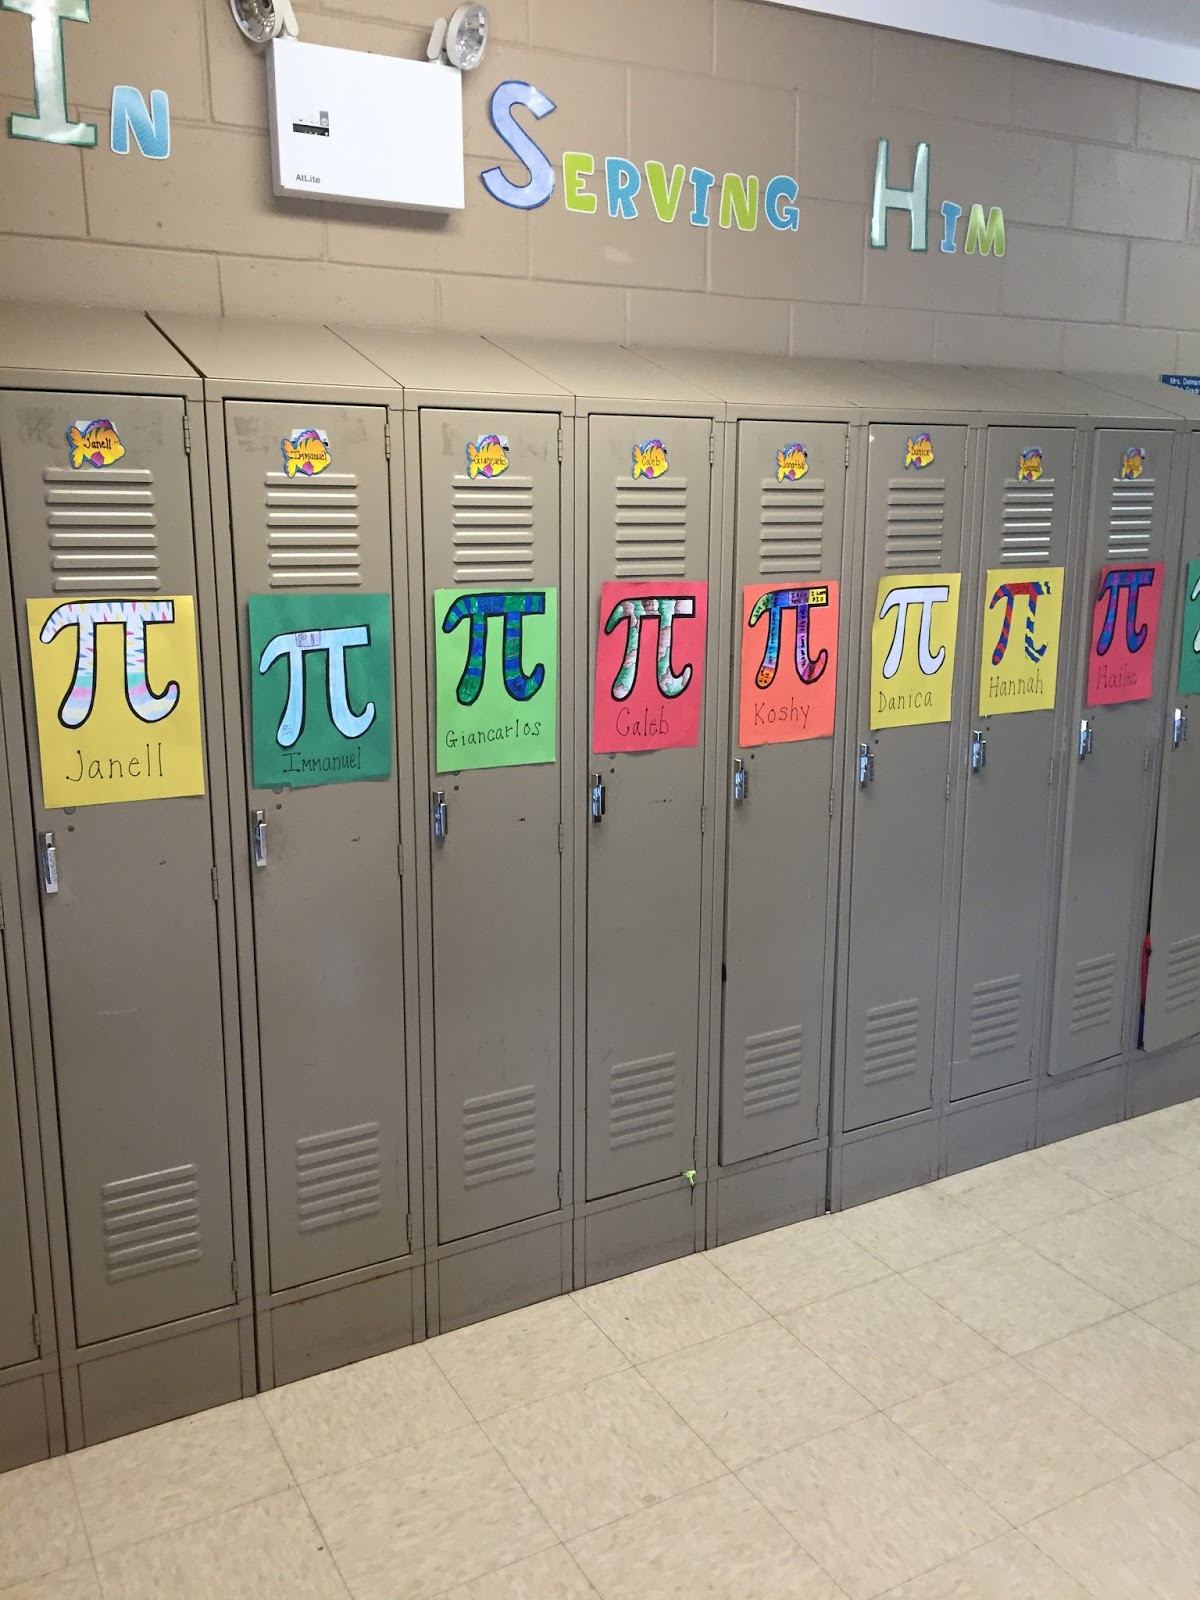 Pi Day Decorating Ideas
 Some of the Best Things in Life are Mistakes Pi Day